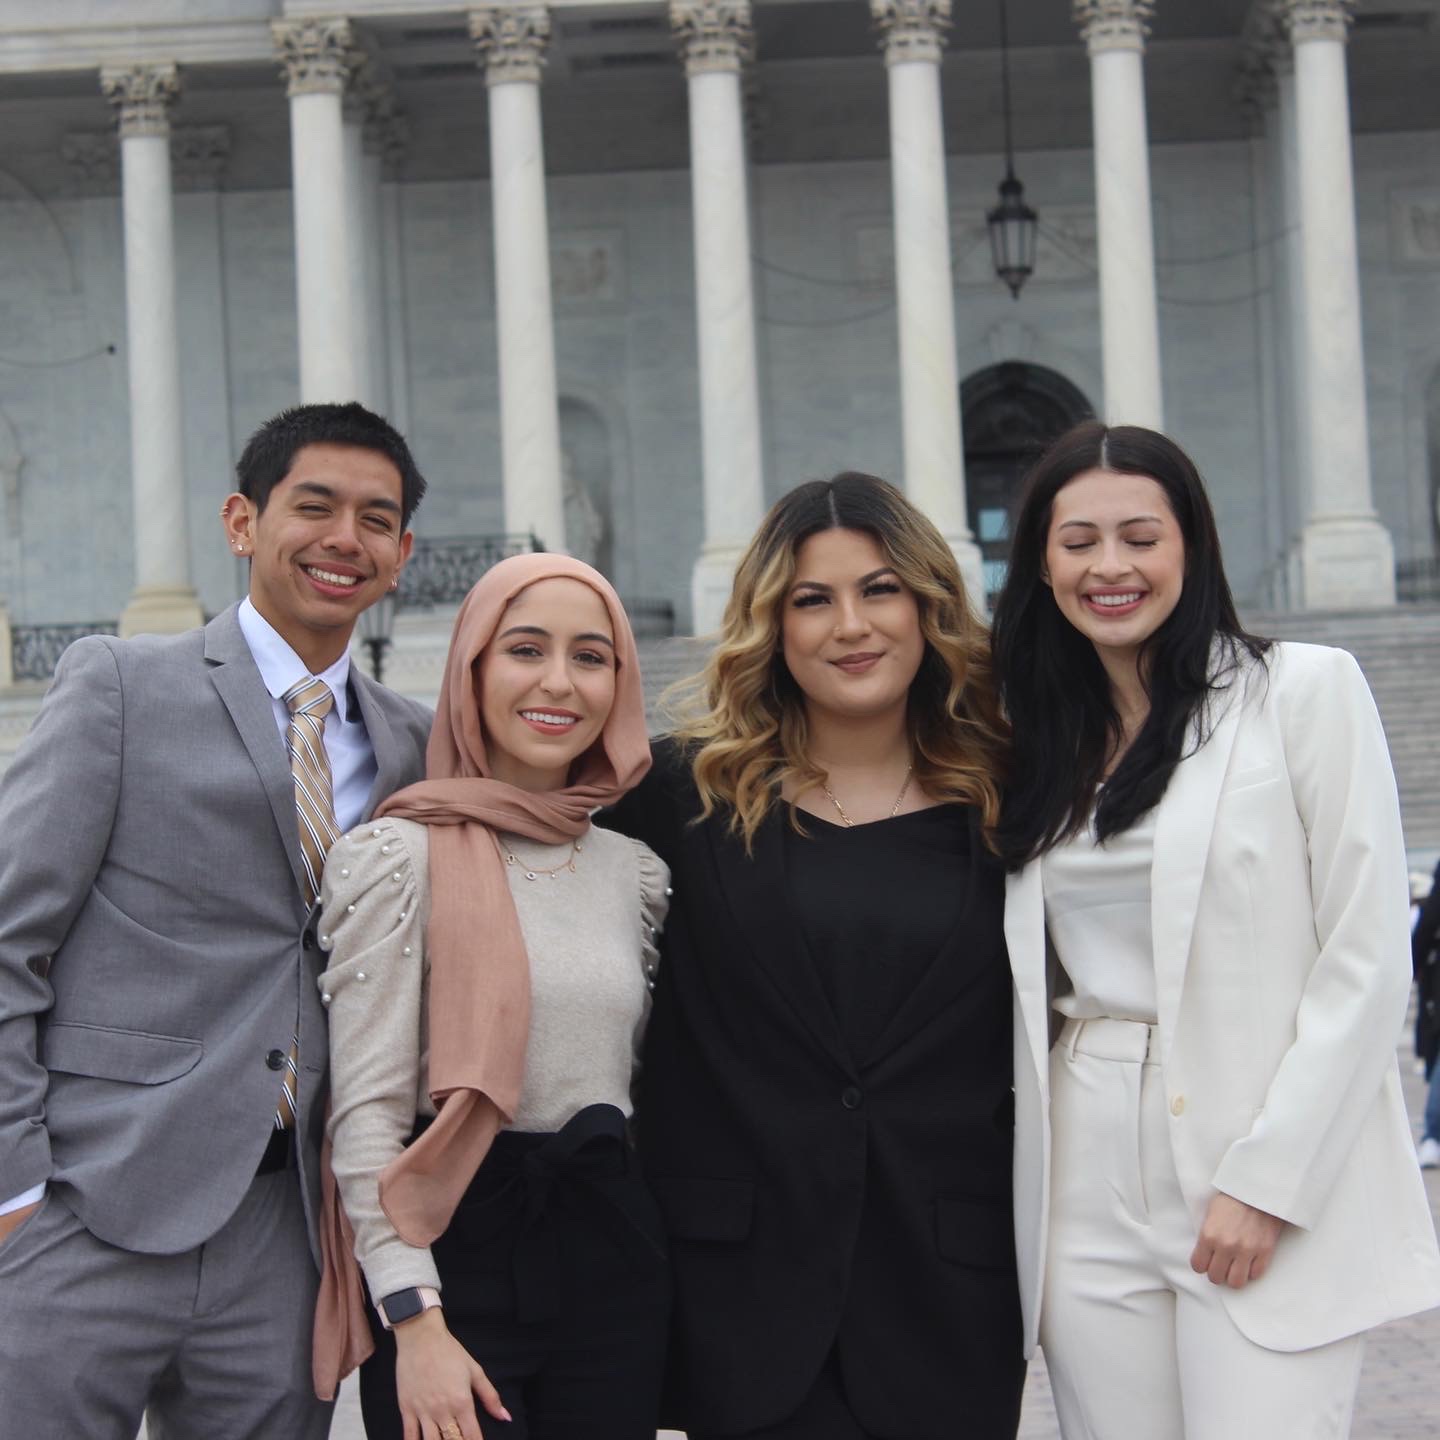 Jordan Guillen standing to the far left with three other friends in front of the Capitol building